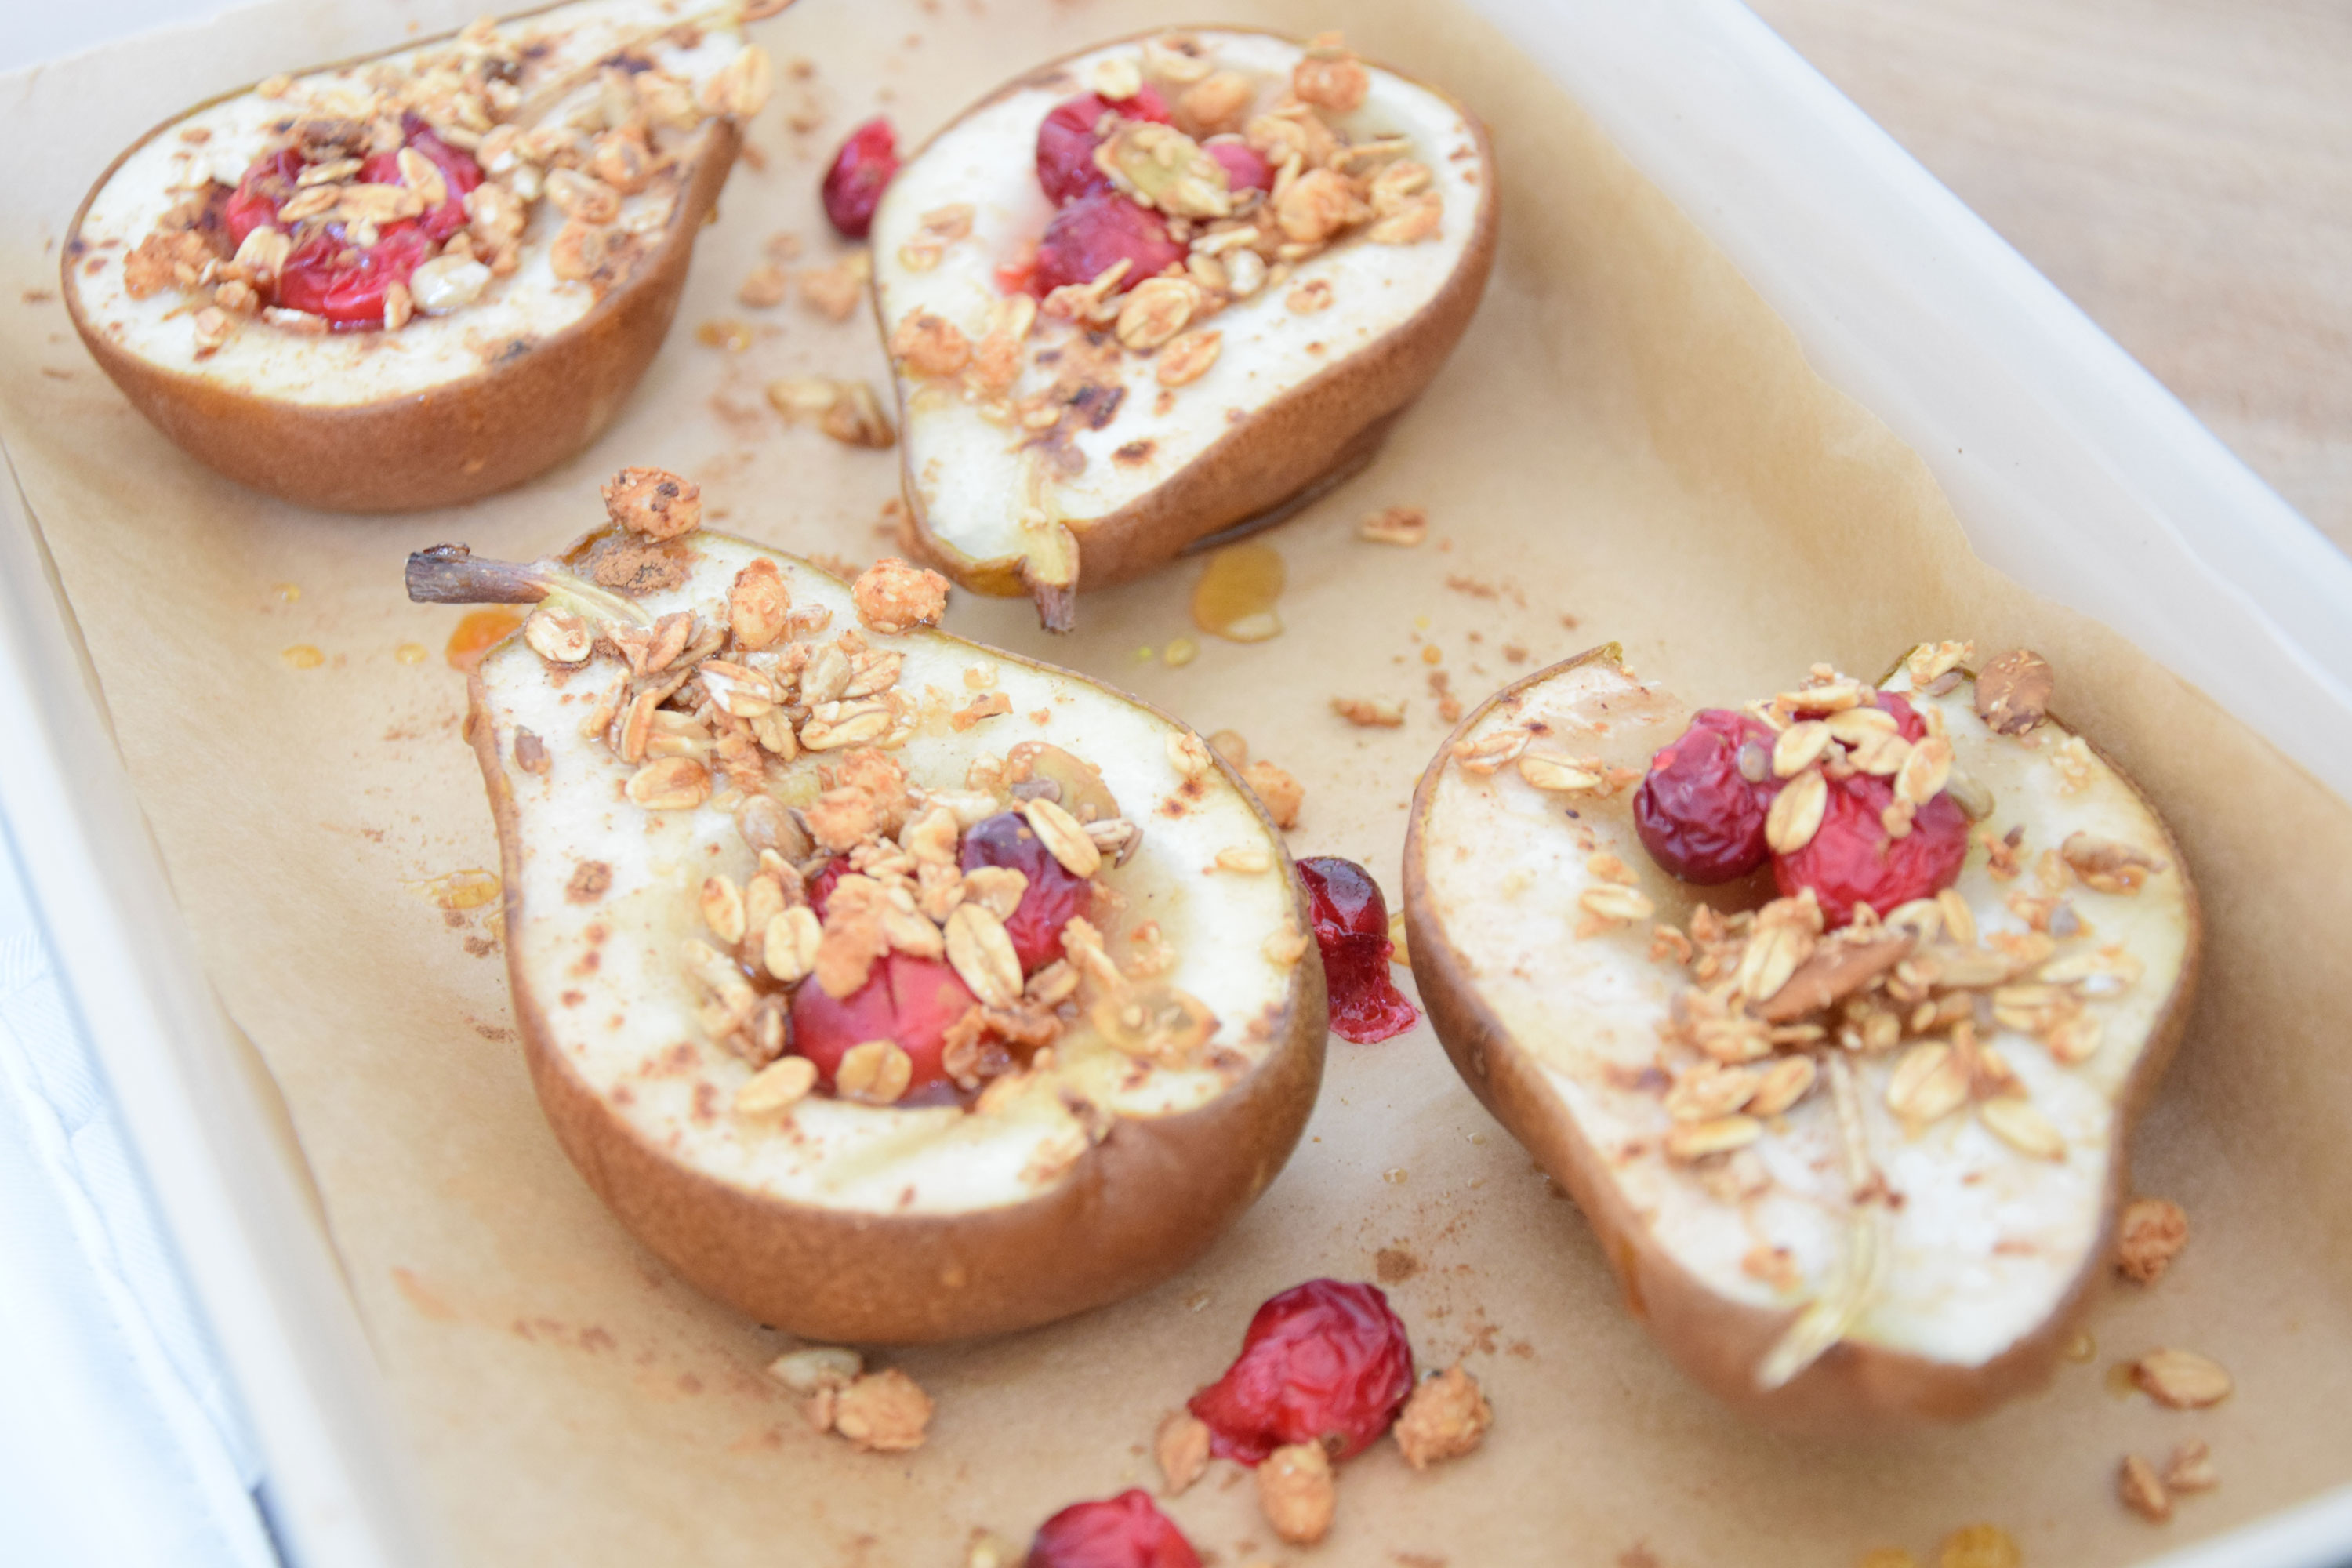 Baked pears with cranberries and XAVIES' Granola topping - XAVIES’